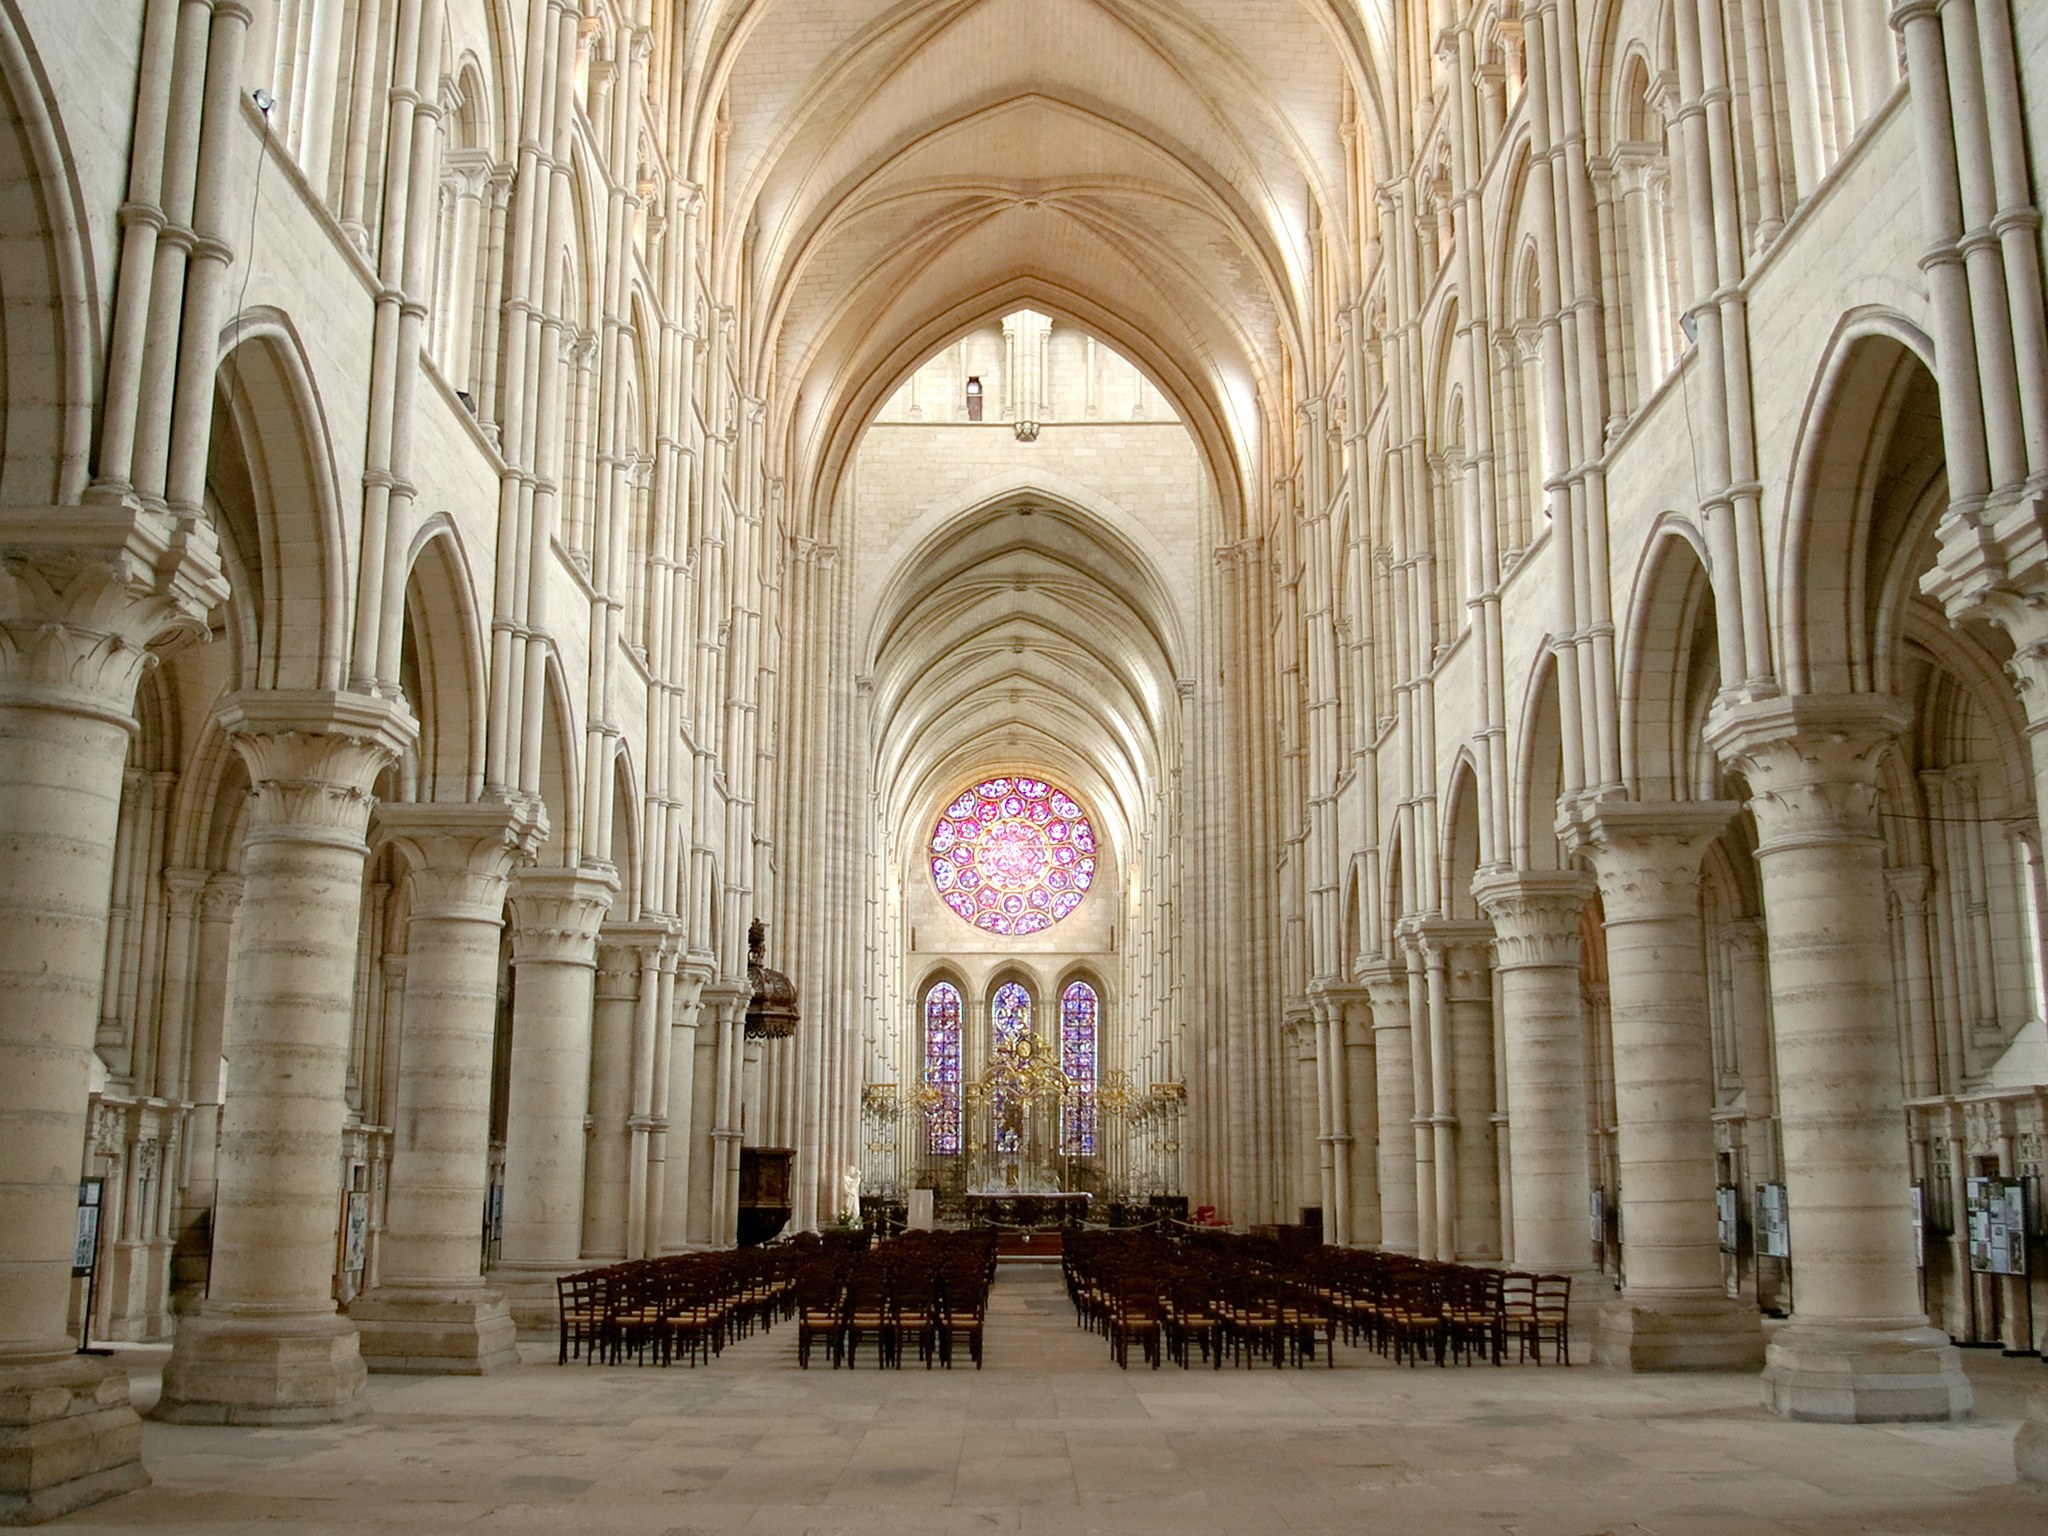 The Most Beautiful Churches in France - Condé Nast Traveler